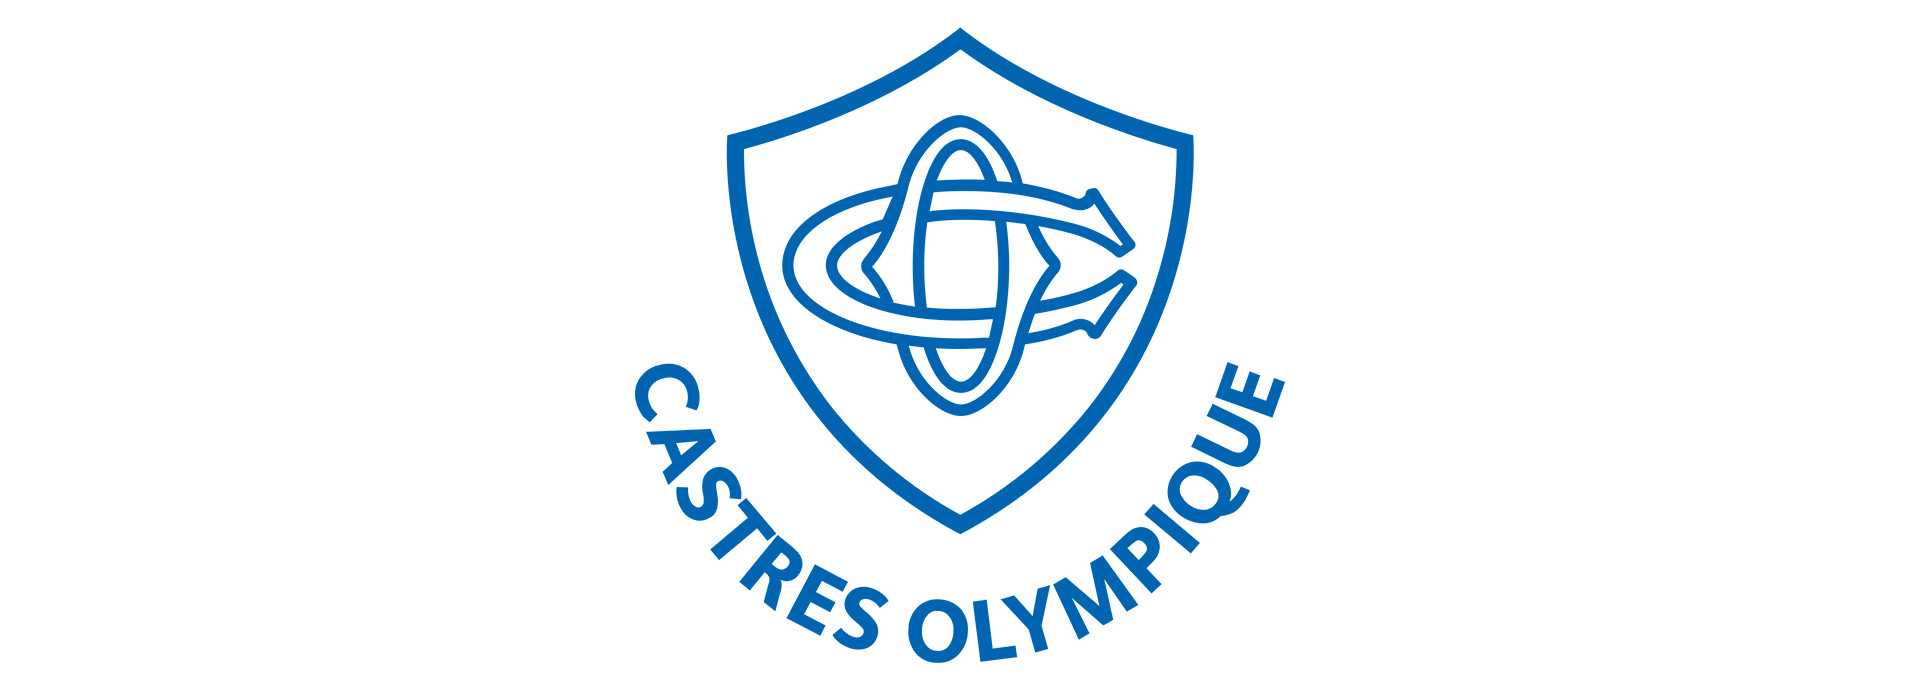 Logo Castres olympique rugby